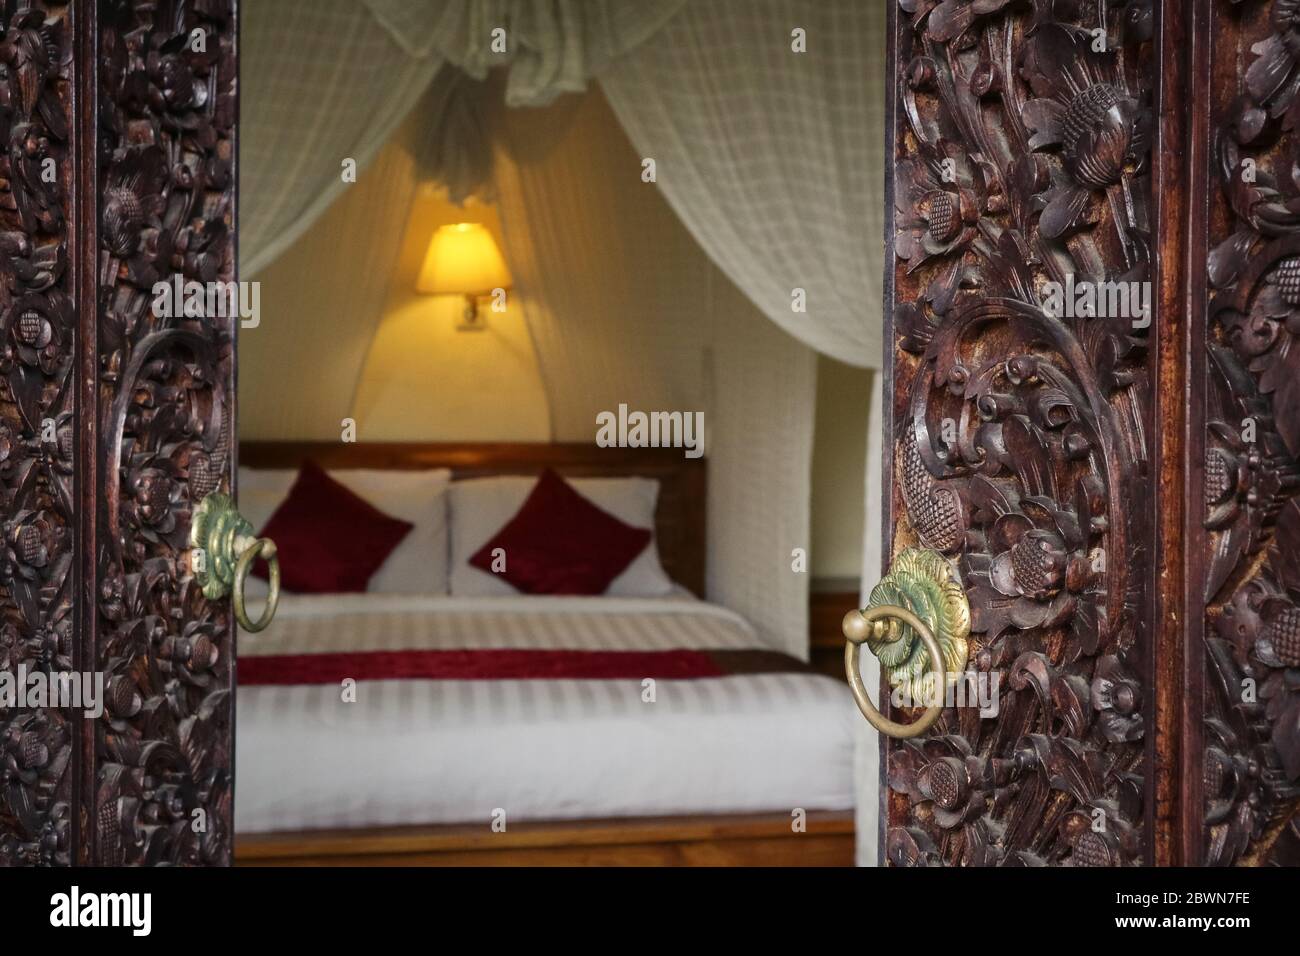 Traditional balinese bed with canopy. View through the opening of carved doors. Stock Photo